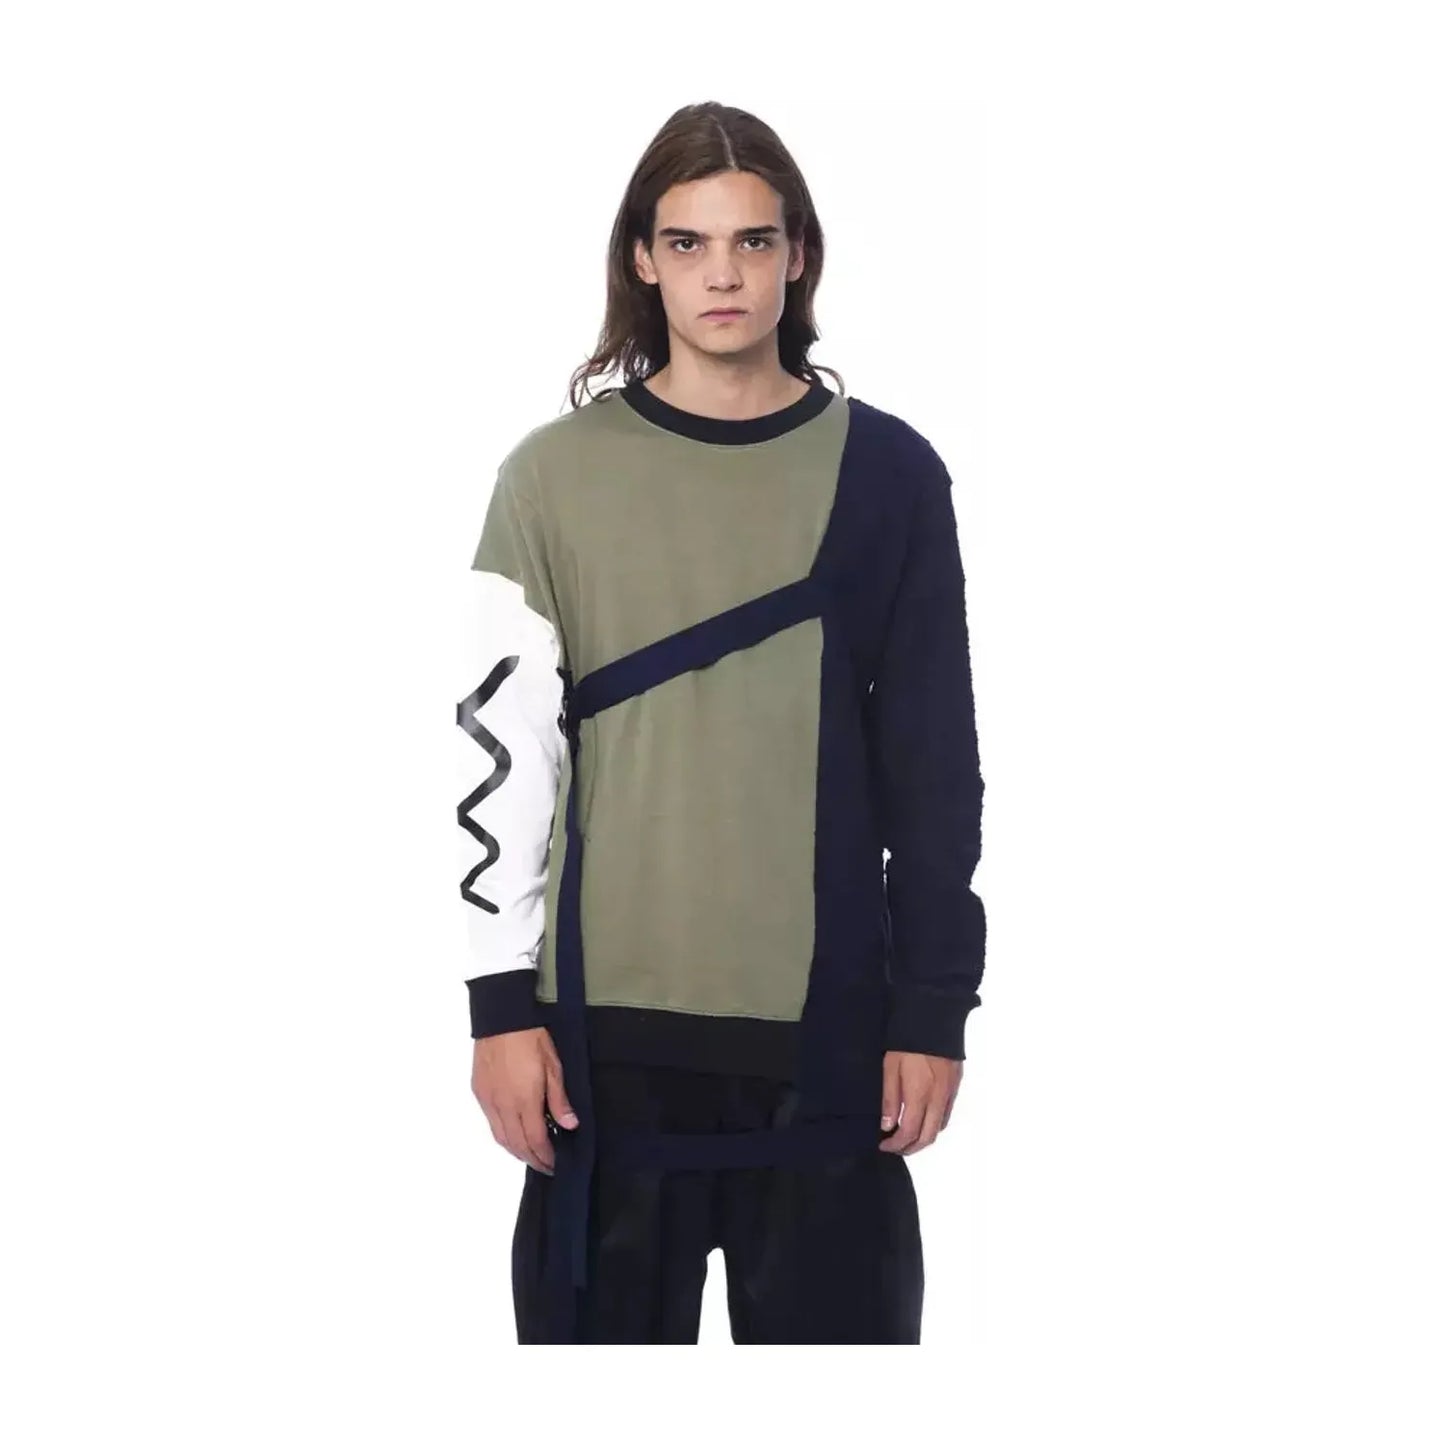 Nicolo Tonetto Elevate Your Style with a Refined Army Fleece army-blue-sweater